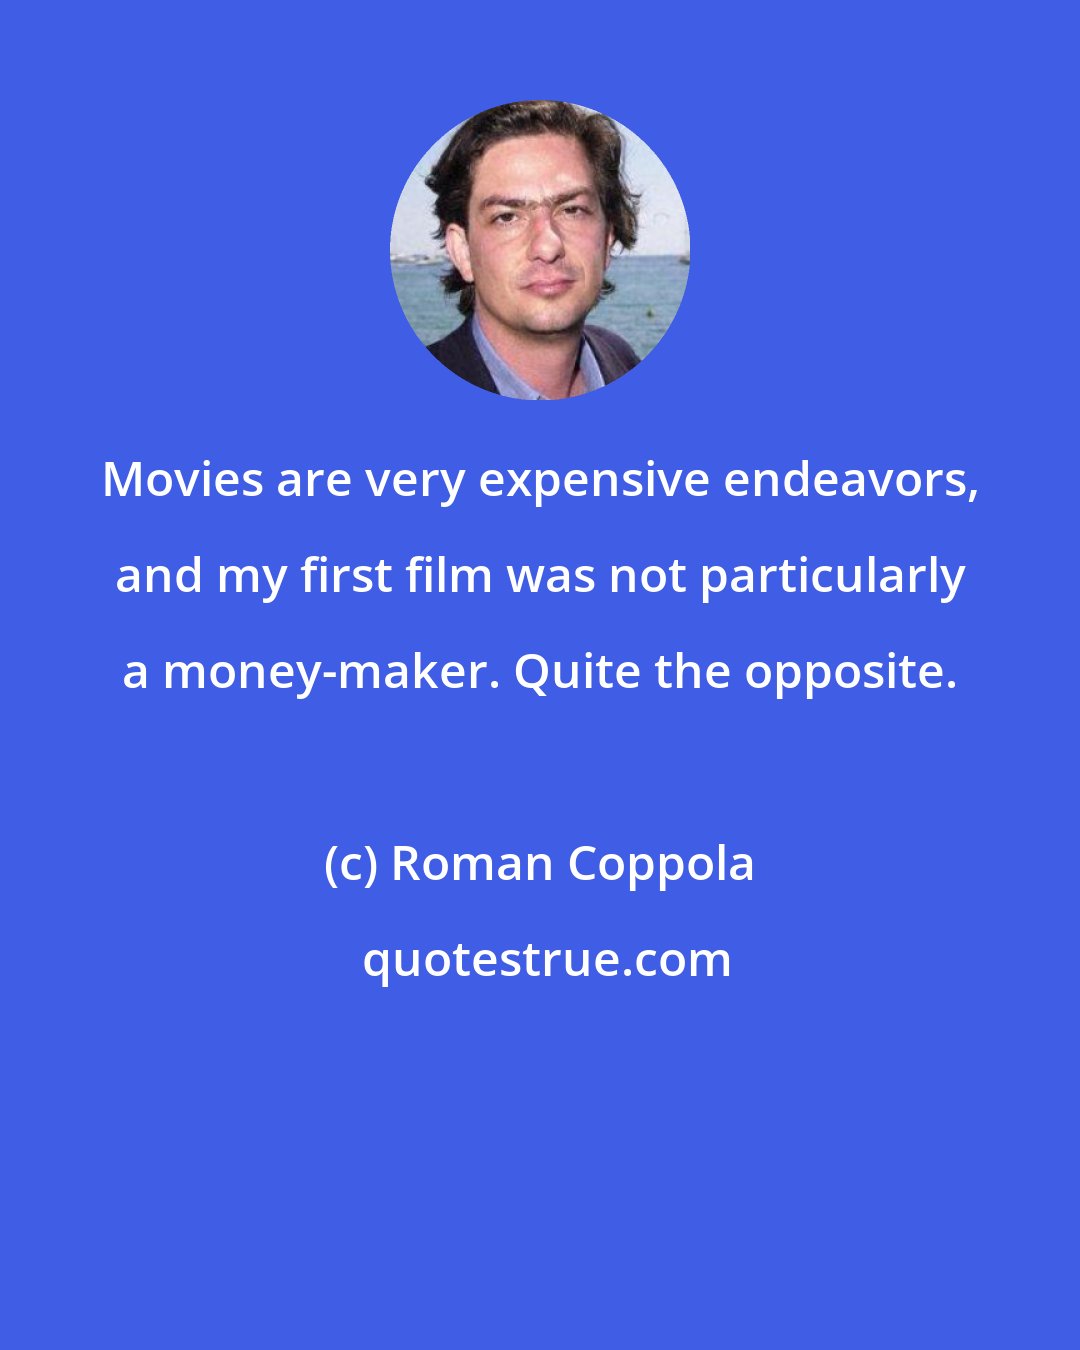 Roman Coppola: Movies are very expensive endeavors, and my first film was not particularly a money-maker. Quite the opposite.